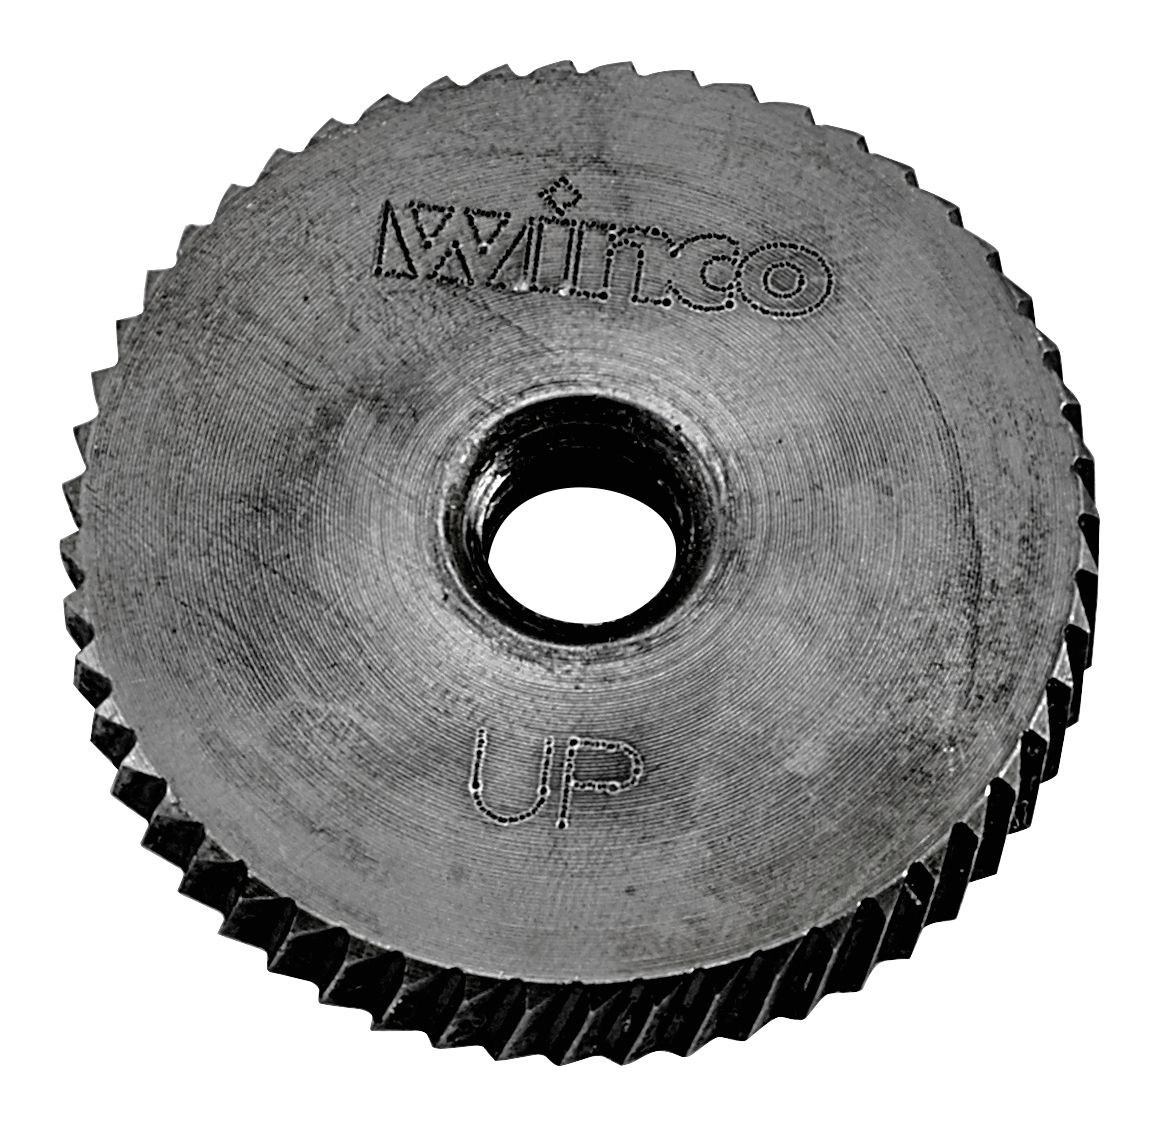 https://www.lionsdeal.com/itempics/Winco-CO-1G-Replacement-Gear-for-CO-1-37757_xlarge.jpg